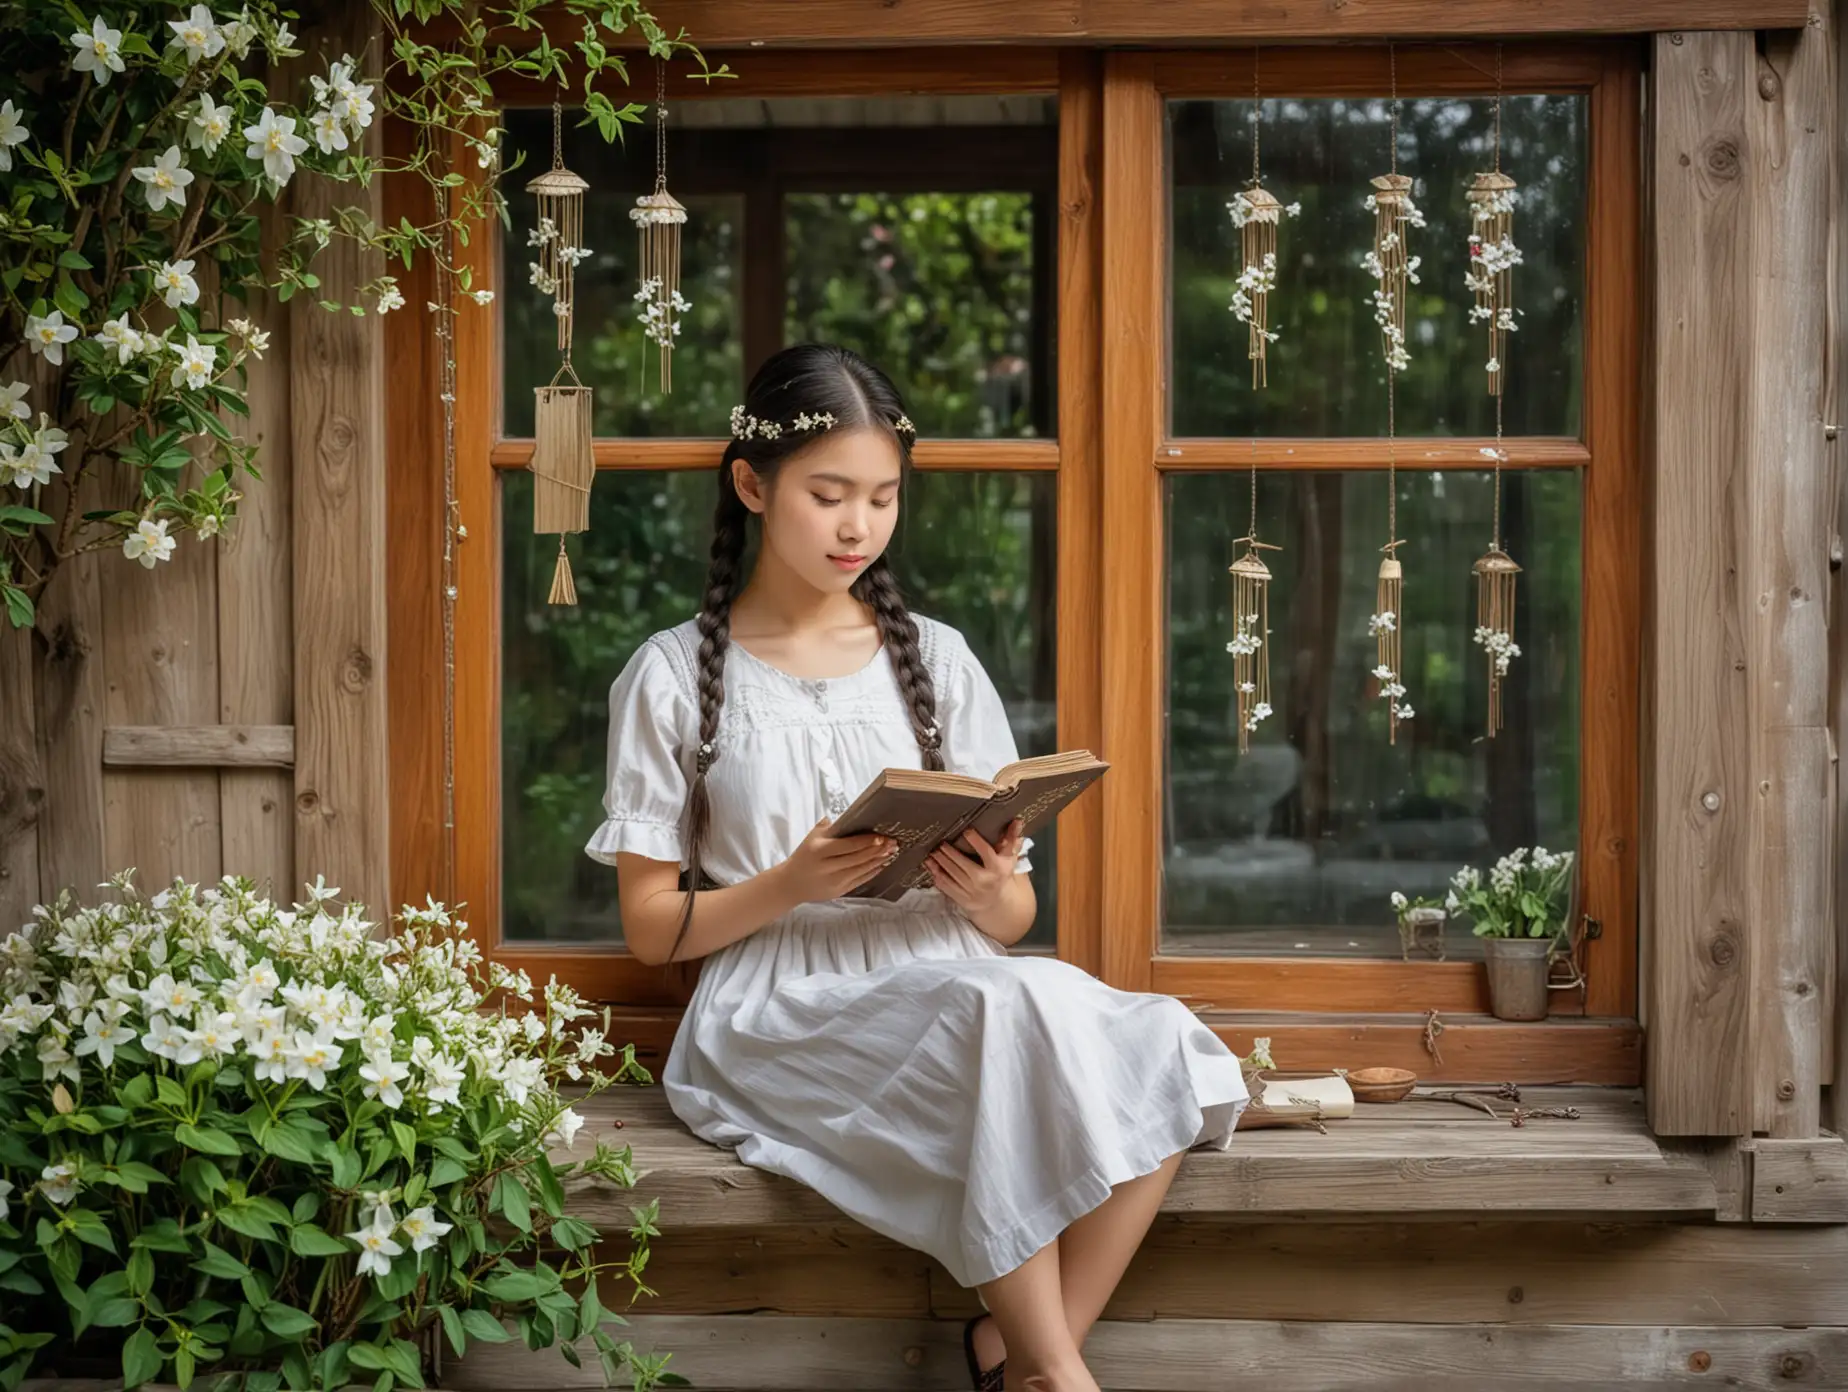 Asian girl, two braids, holding a book, sitting in front of the window of a small wooden house, wood-framed glass window, a string of wind chimes in front of it, flowers consisting of several white jasmine beneath it